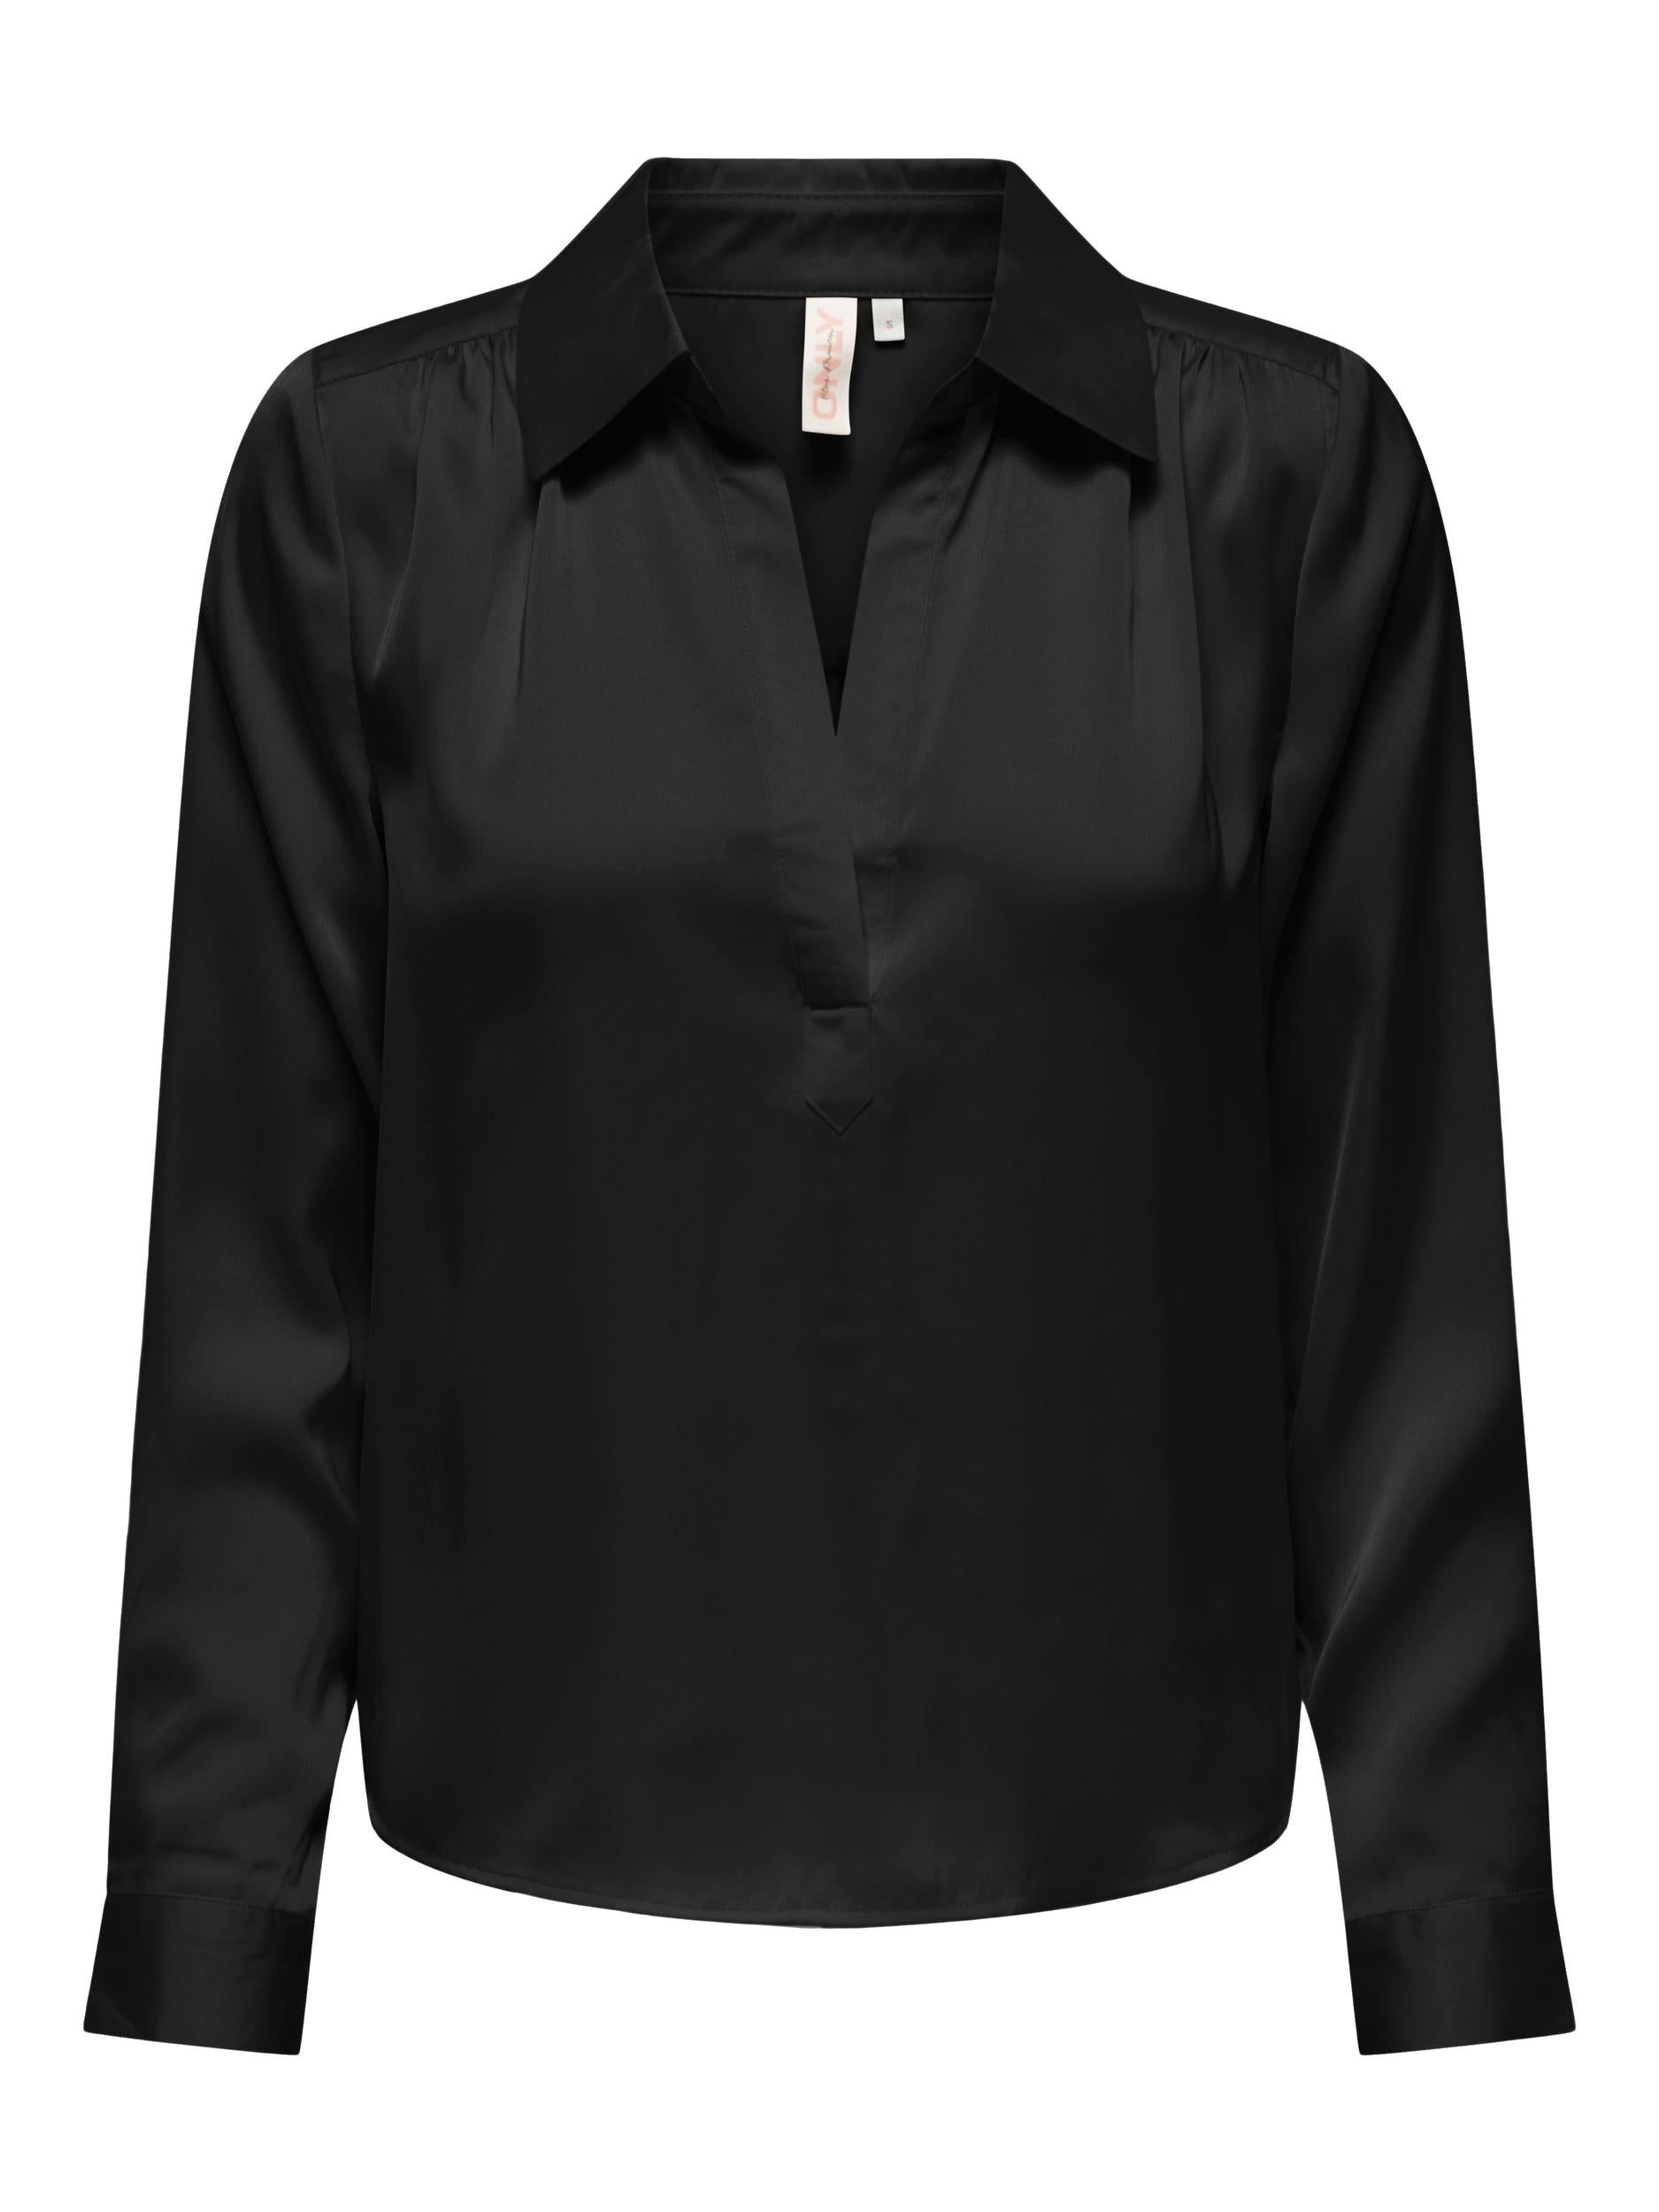 Zora Long Sleeve V-neck Collar Black Top-Ghost image view